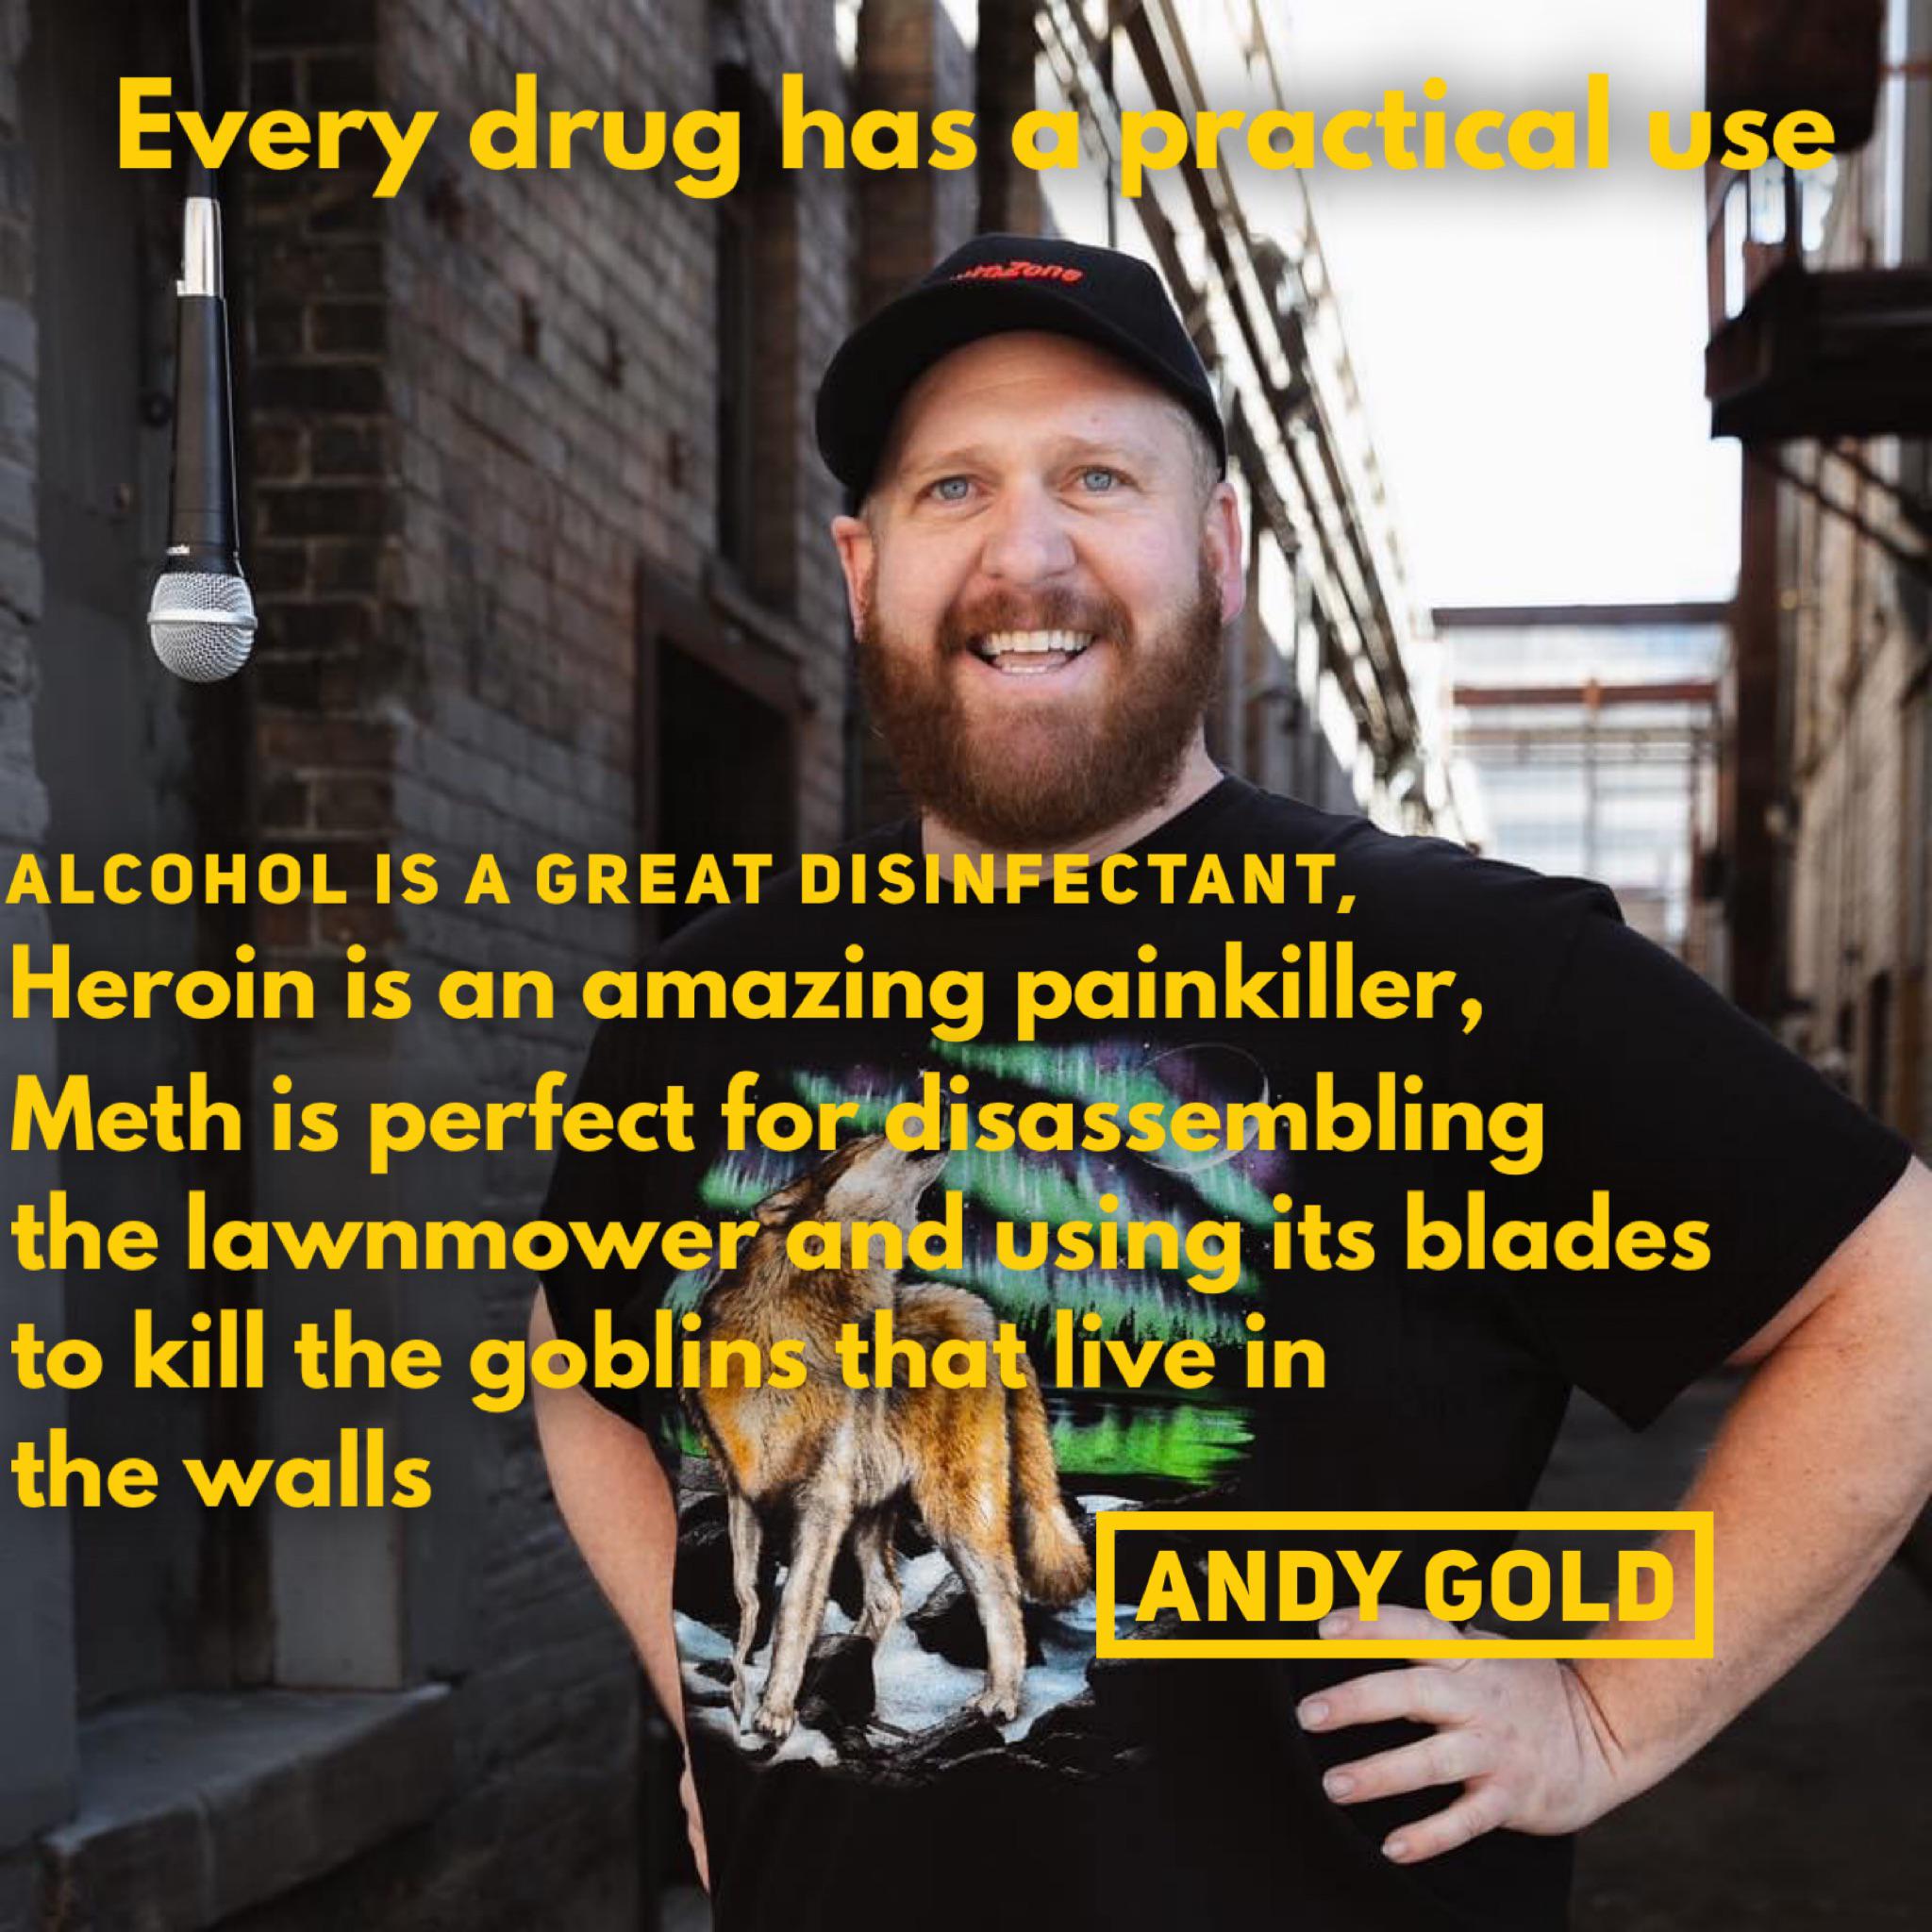 photo caption - Every drug has a practical use zone Alcohol Is A Great Disinfectant, Heroin is an amazing painkiller, Meth is perfect for disassembling the lawnmower and using its blades to kill the goblins that live in the walls A Landy Gold